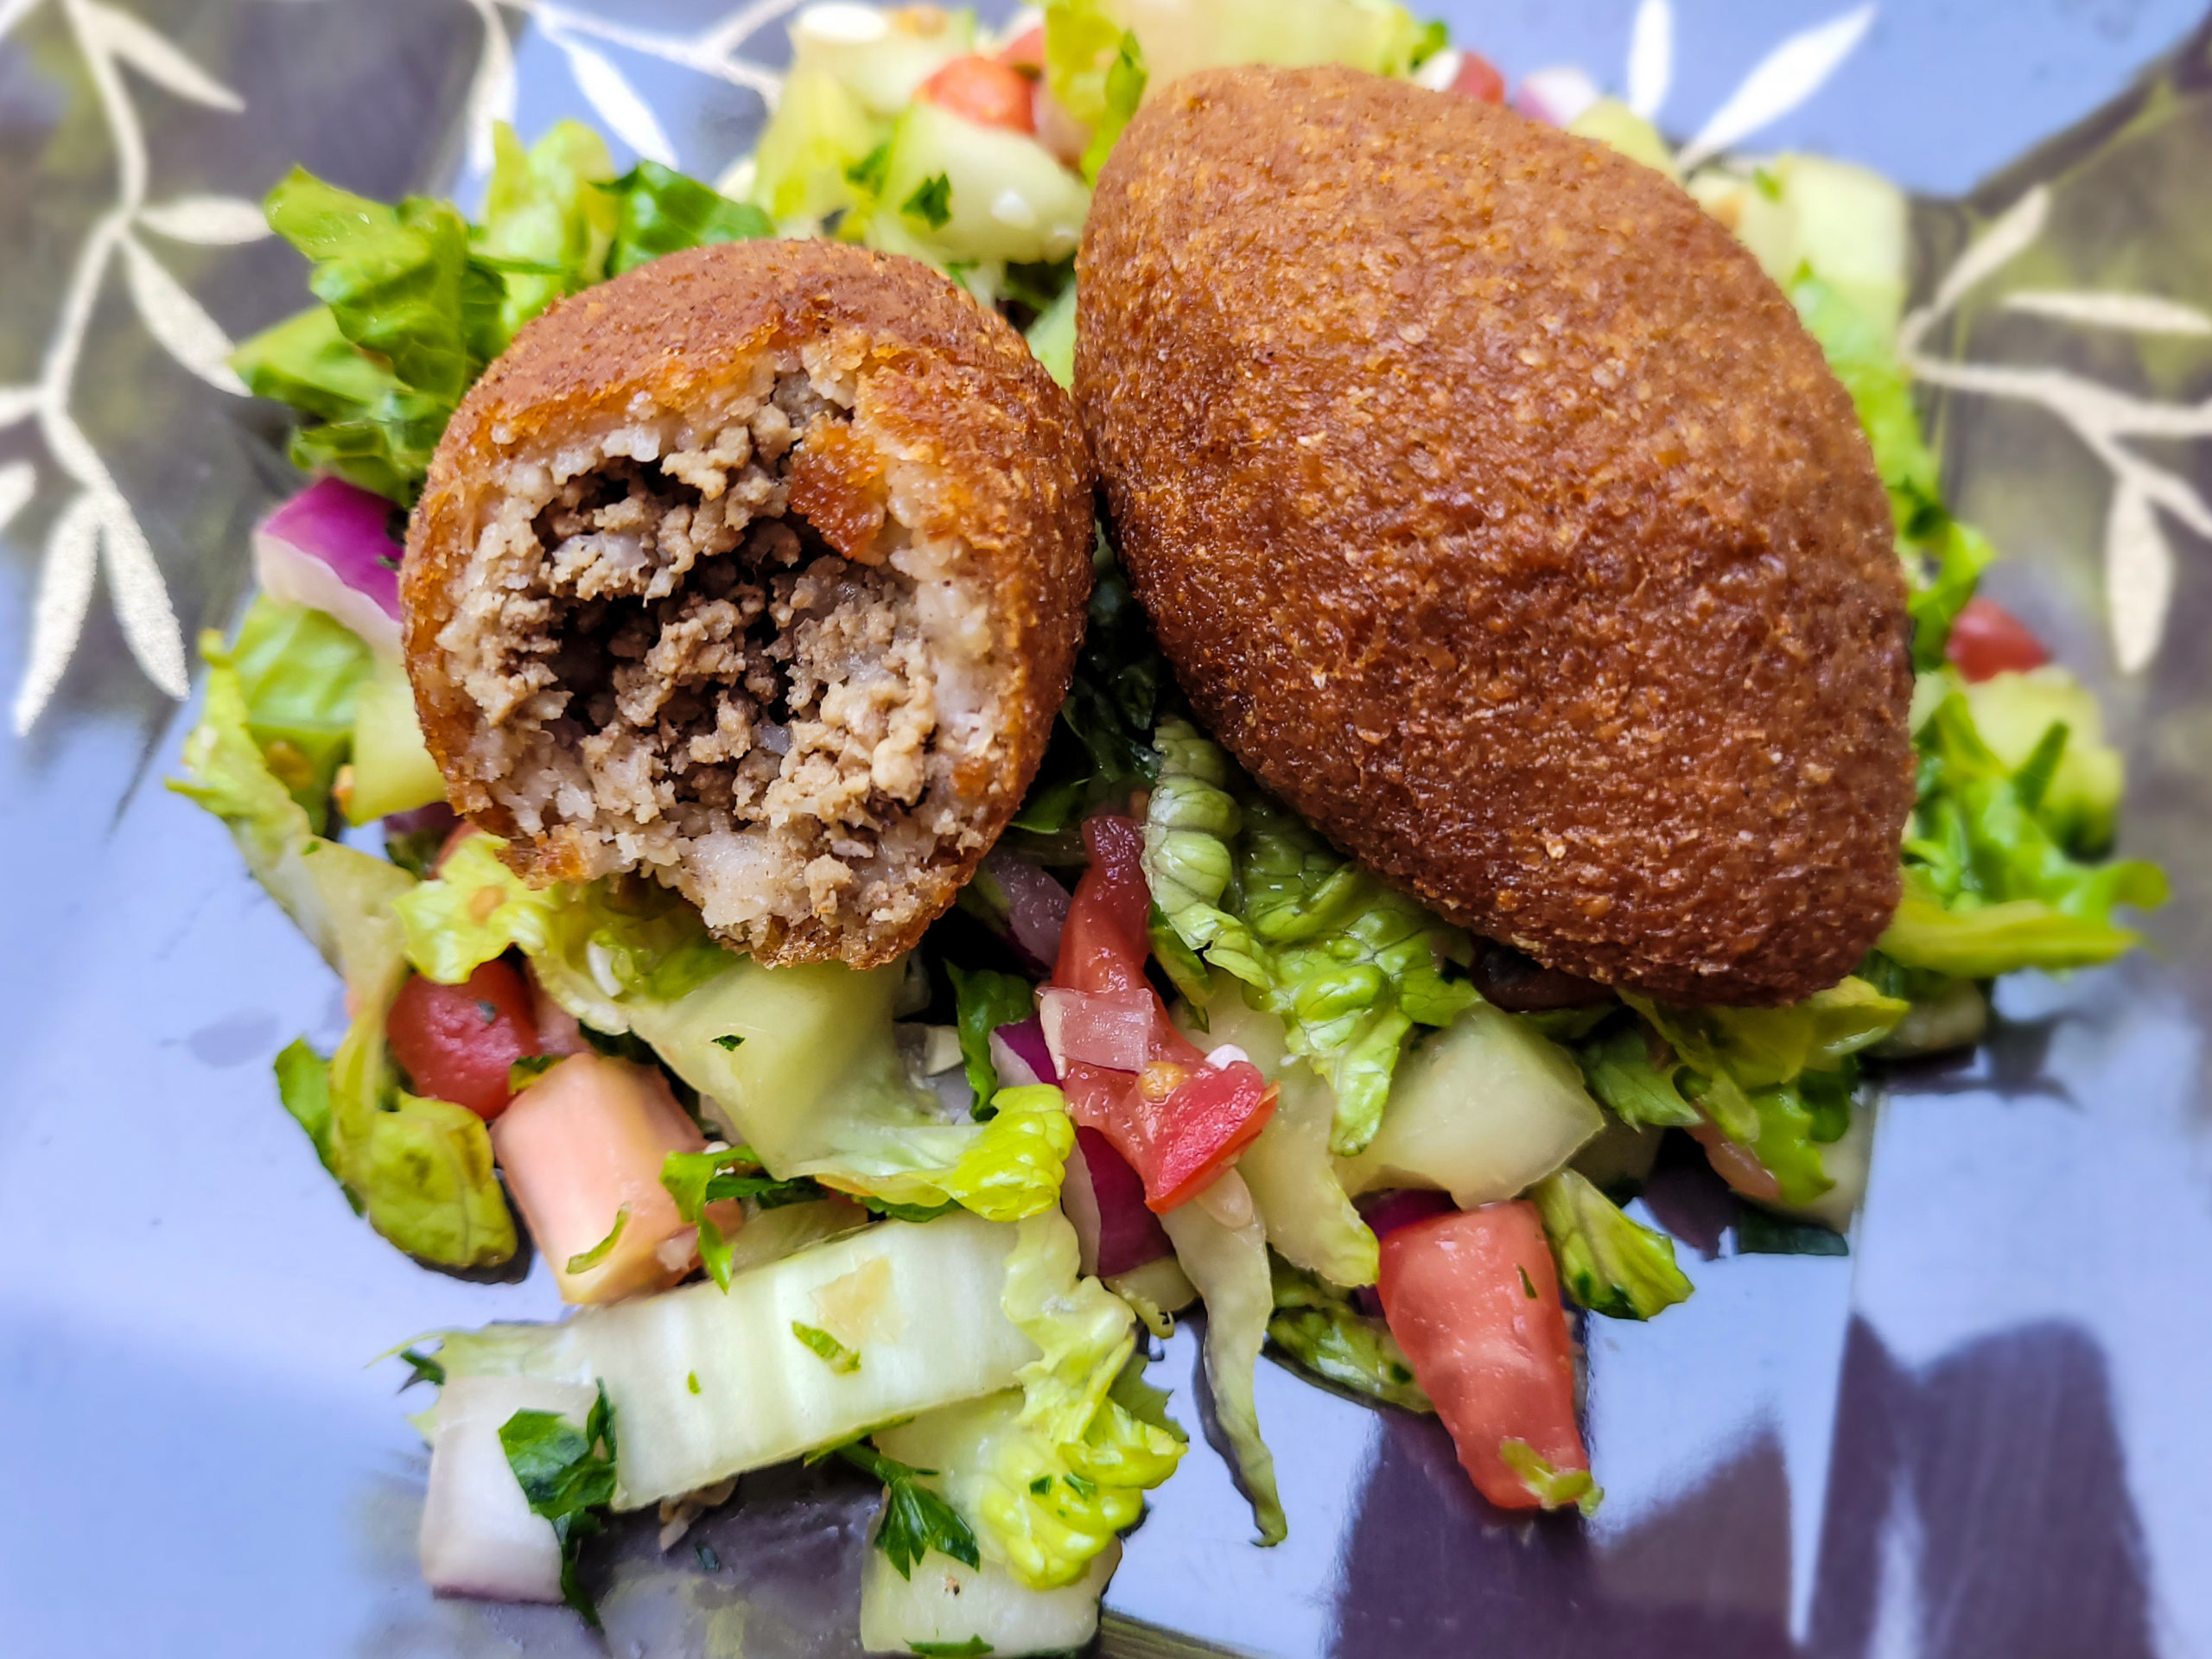 Kibbie, ground beef with cracked wheat and pine nuts. (Heather Irwin/The Press Democrat)